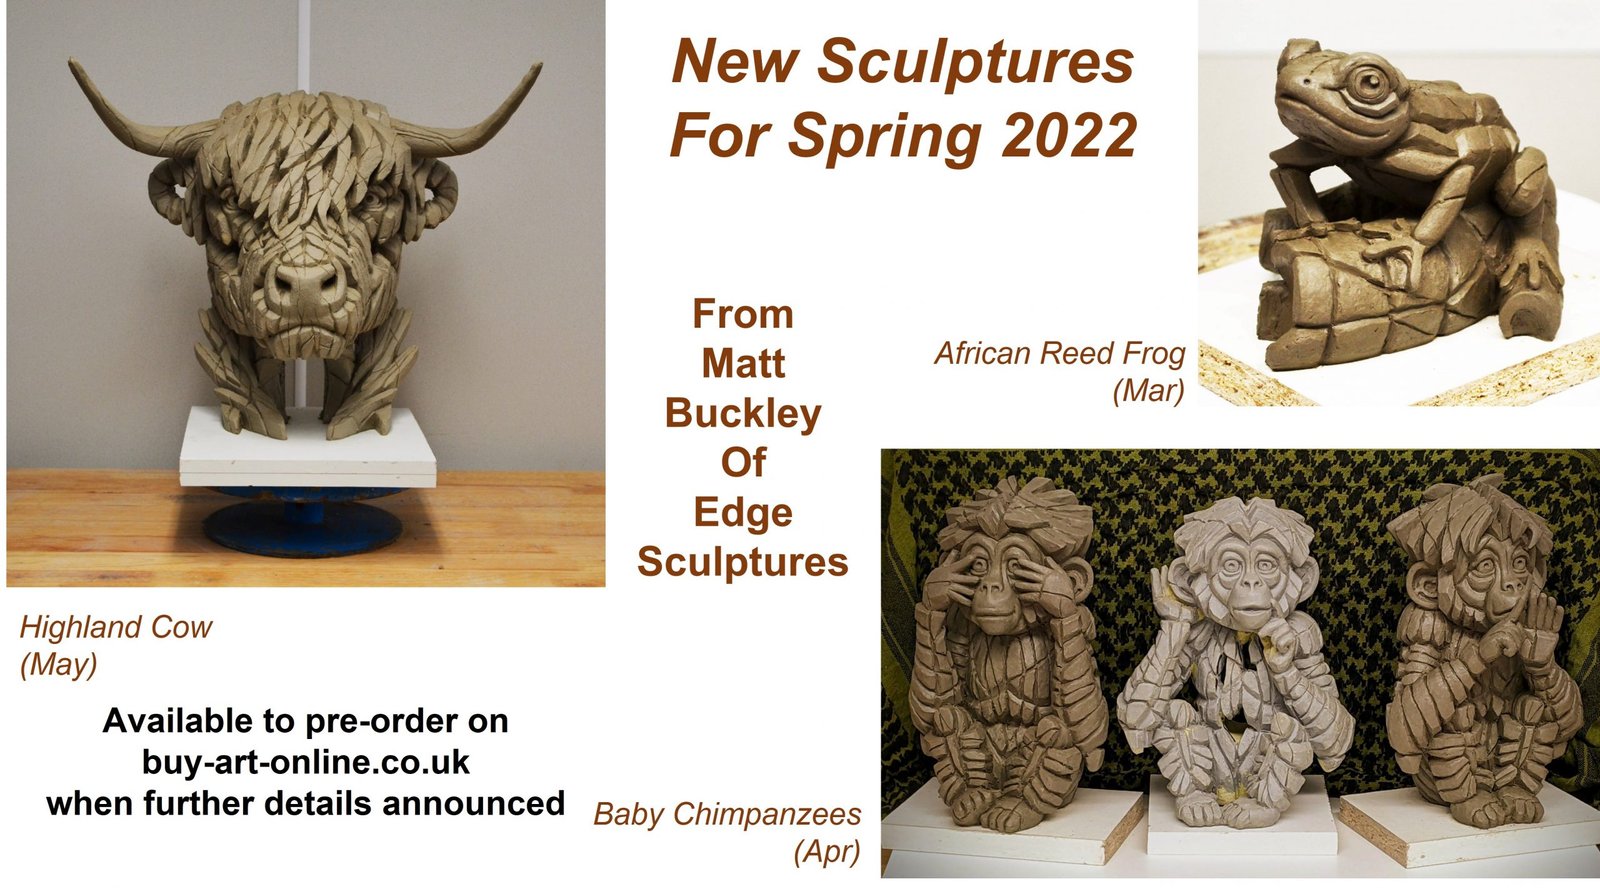 New Edge Sculptures for Spring 2022